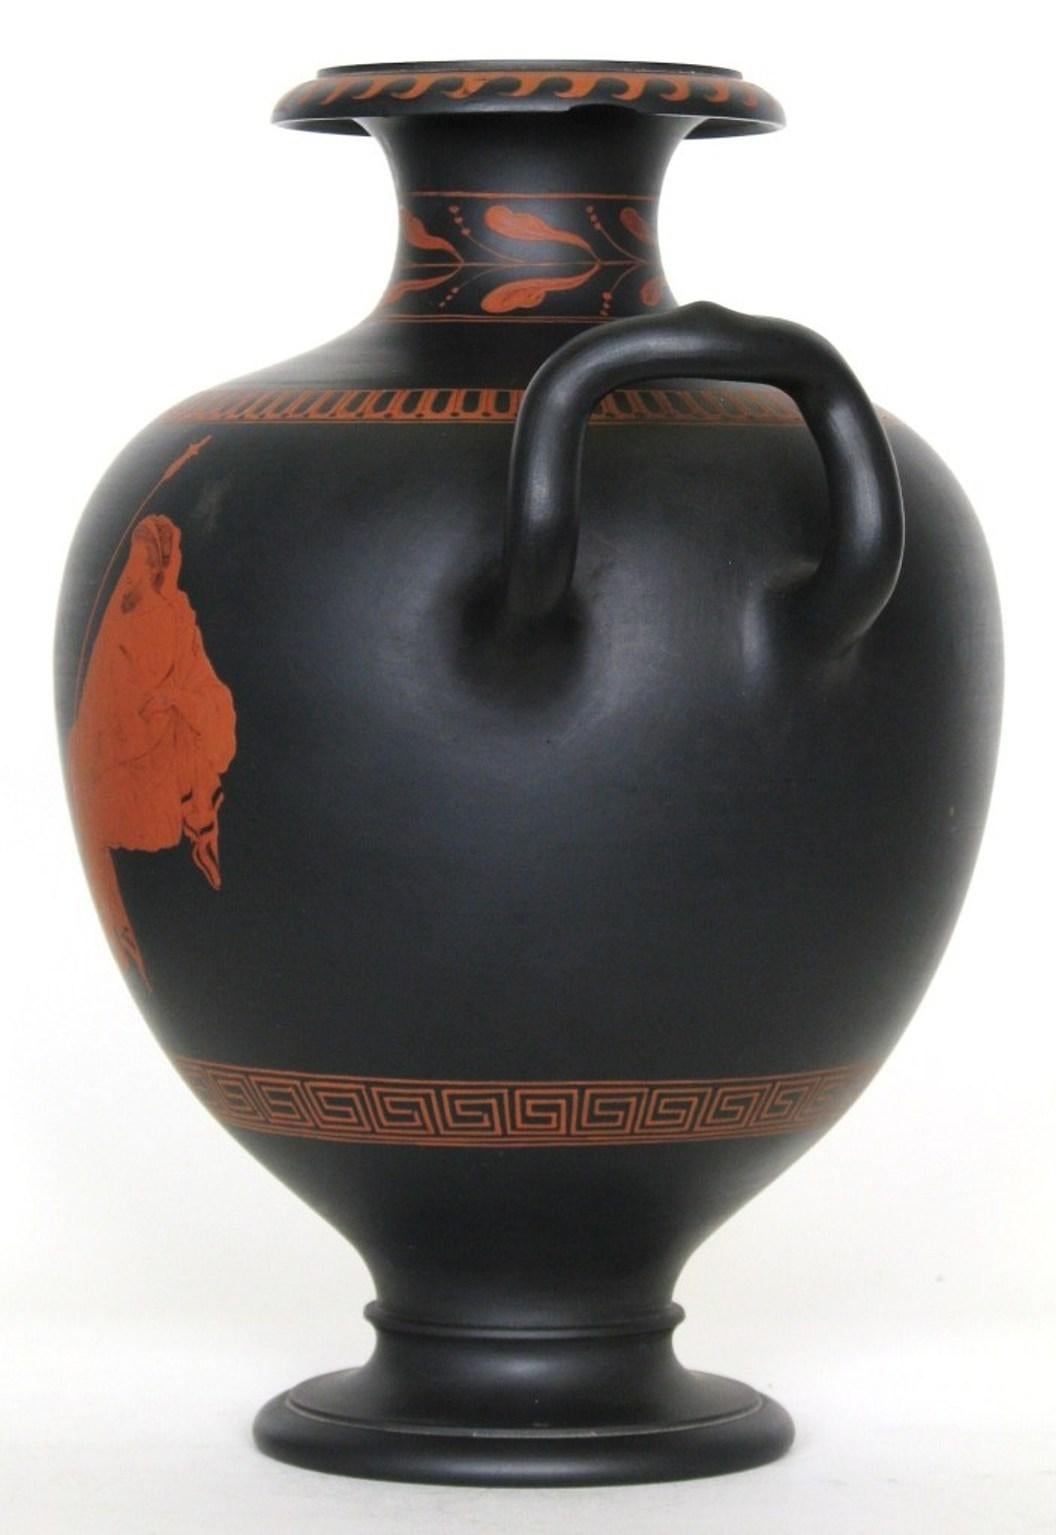 A fine, large vase in black basalt, decorated with an encaustic painted figure of a youth and an older man, taken from The Hamilton vase in the British Museum. It is unusual to find an example made and fired as a single piece, a sign of early